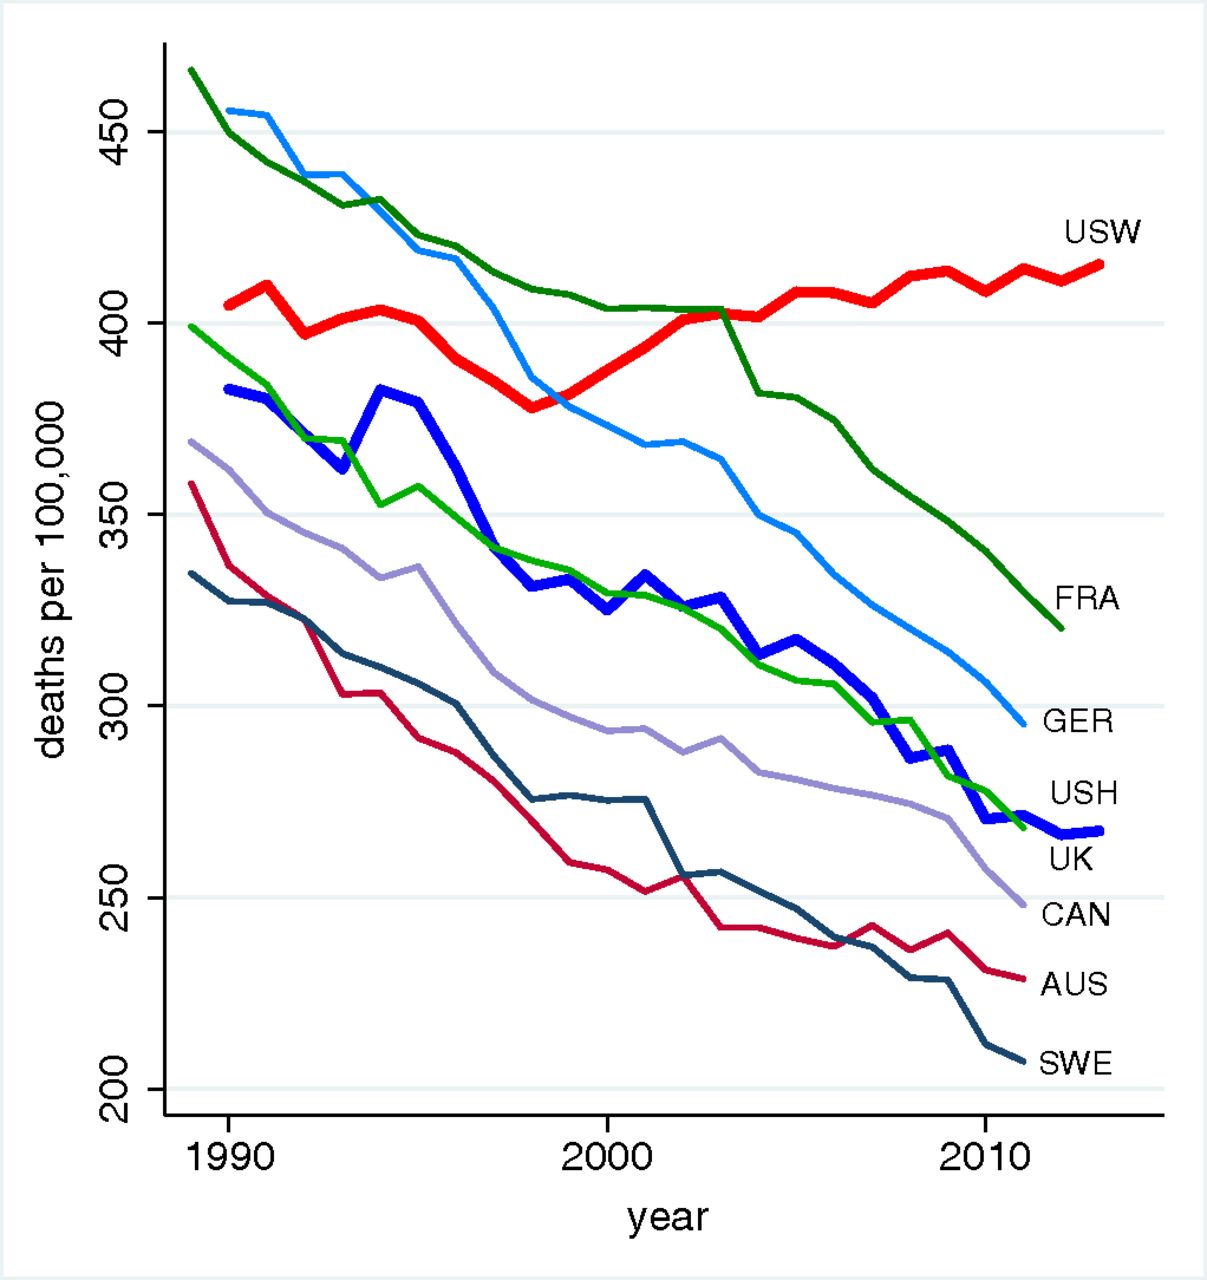 Mortality Rate of U.S. Whites (USW) Is Increasing Relative to Other Advanced Countries and U.S. Hispanics (USH)